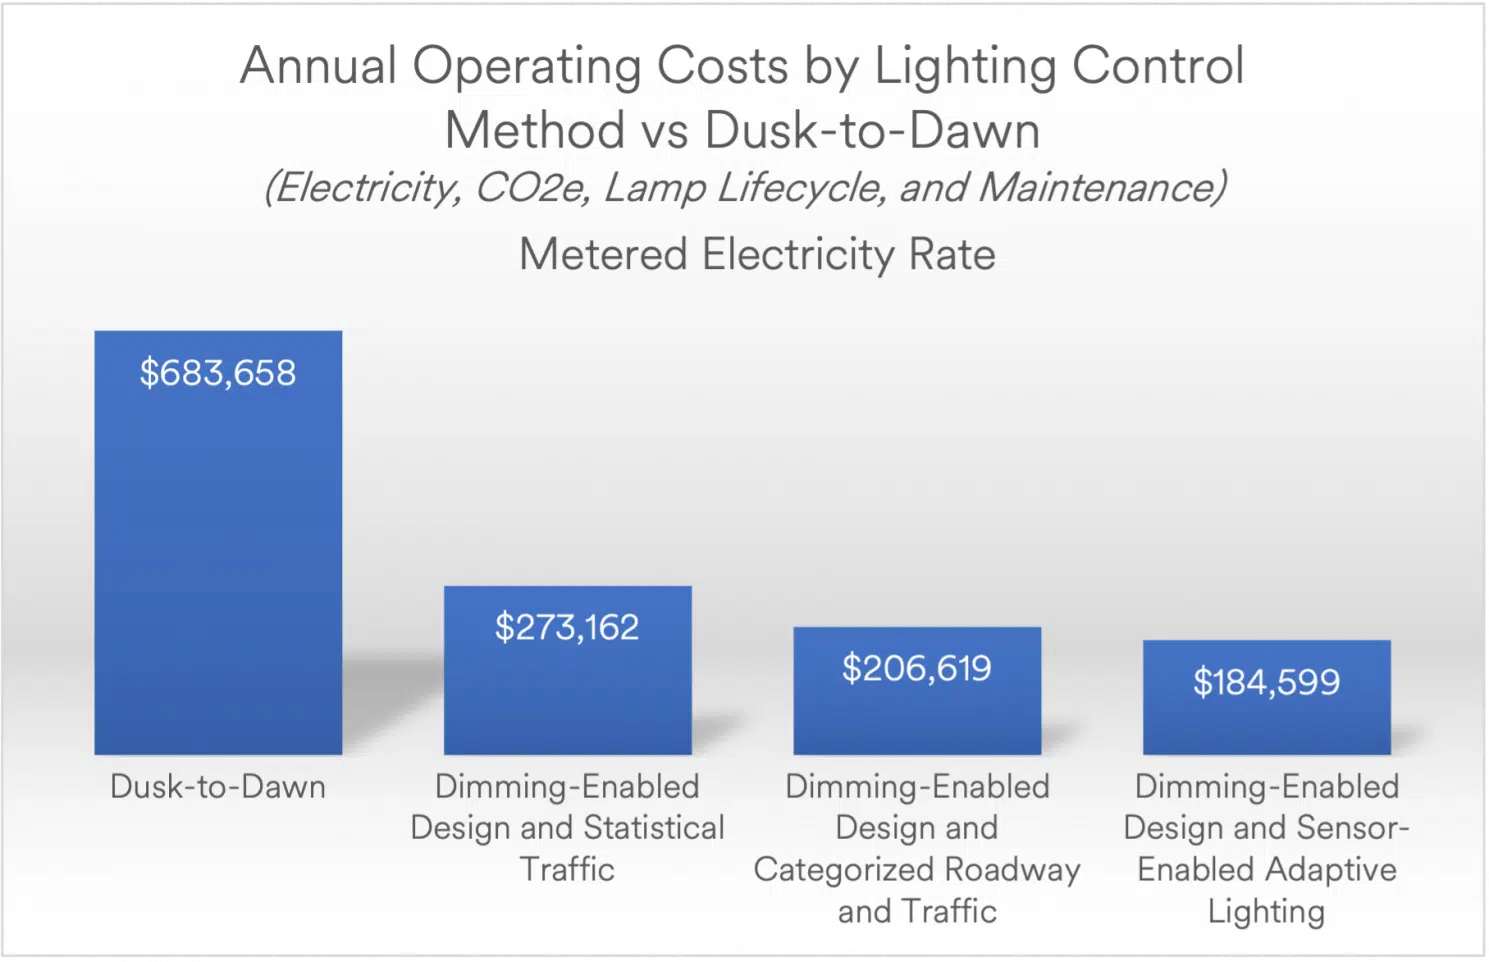 A bar chart describing the annual operating costs of dusk-to-dawn lighting control versus Smart Lighting-enabled dimming controls.